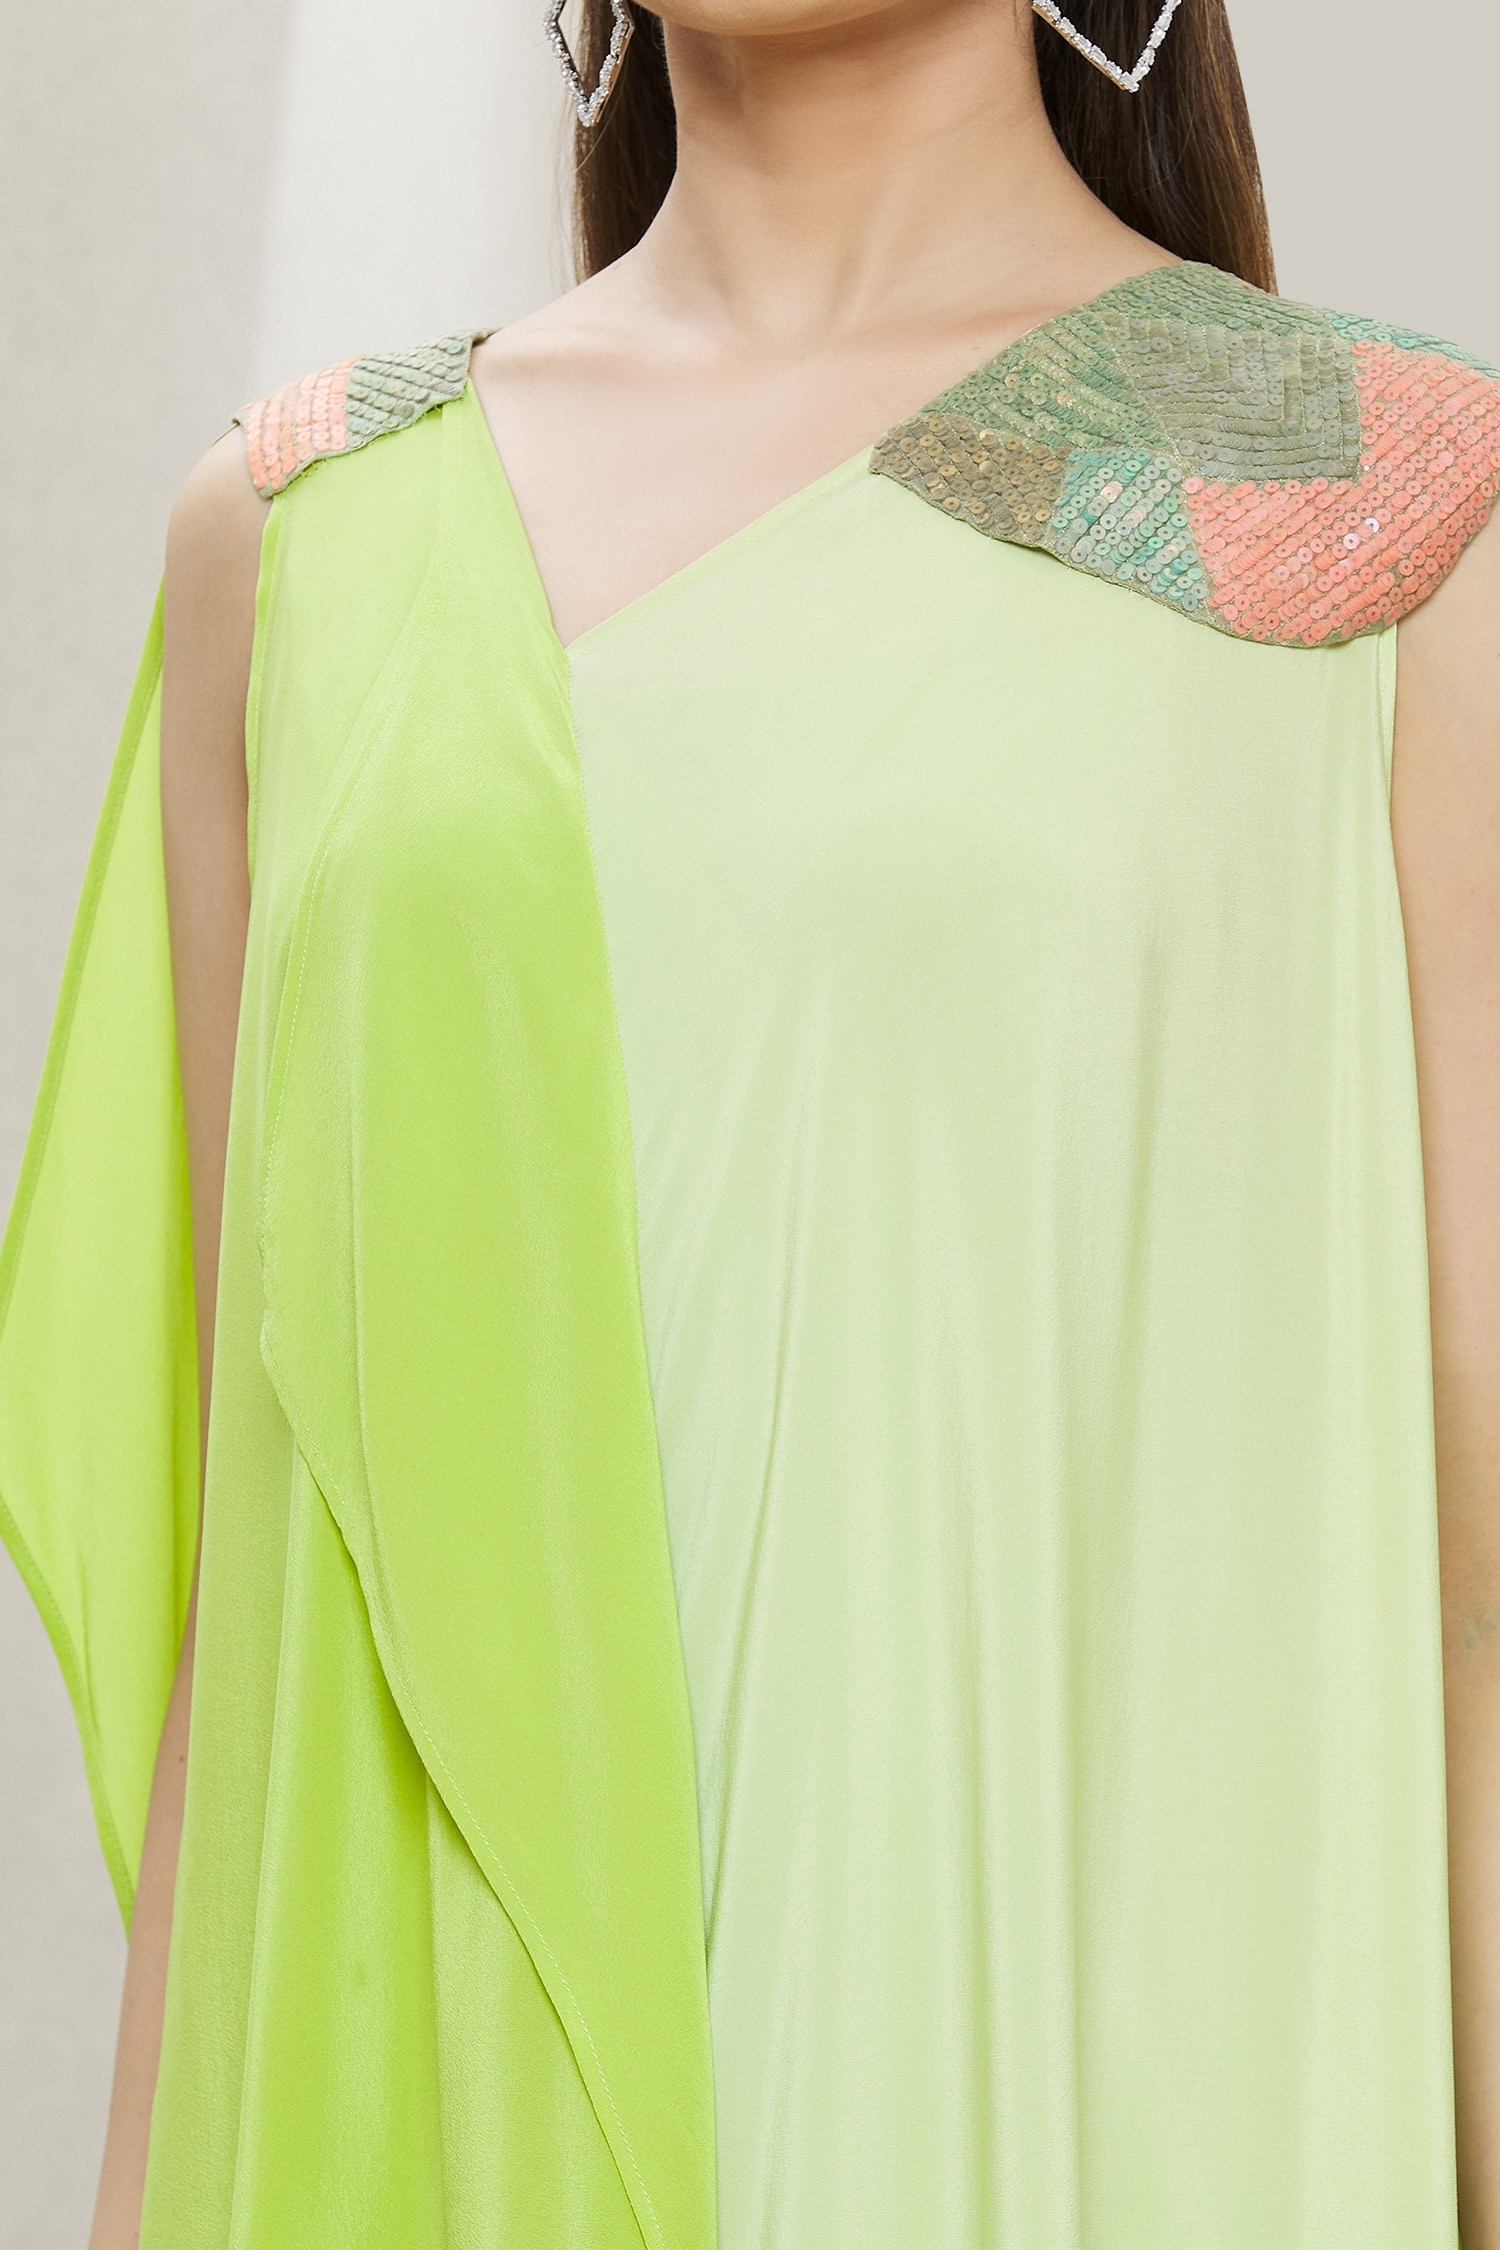 Green And Gold Color Combination Dress | urbtic.com